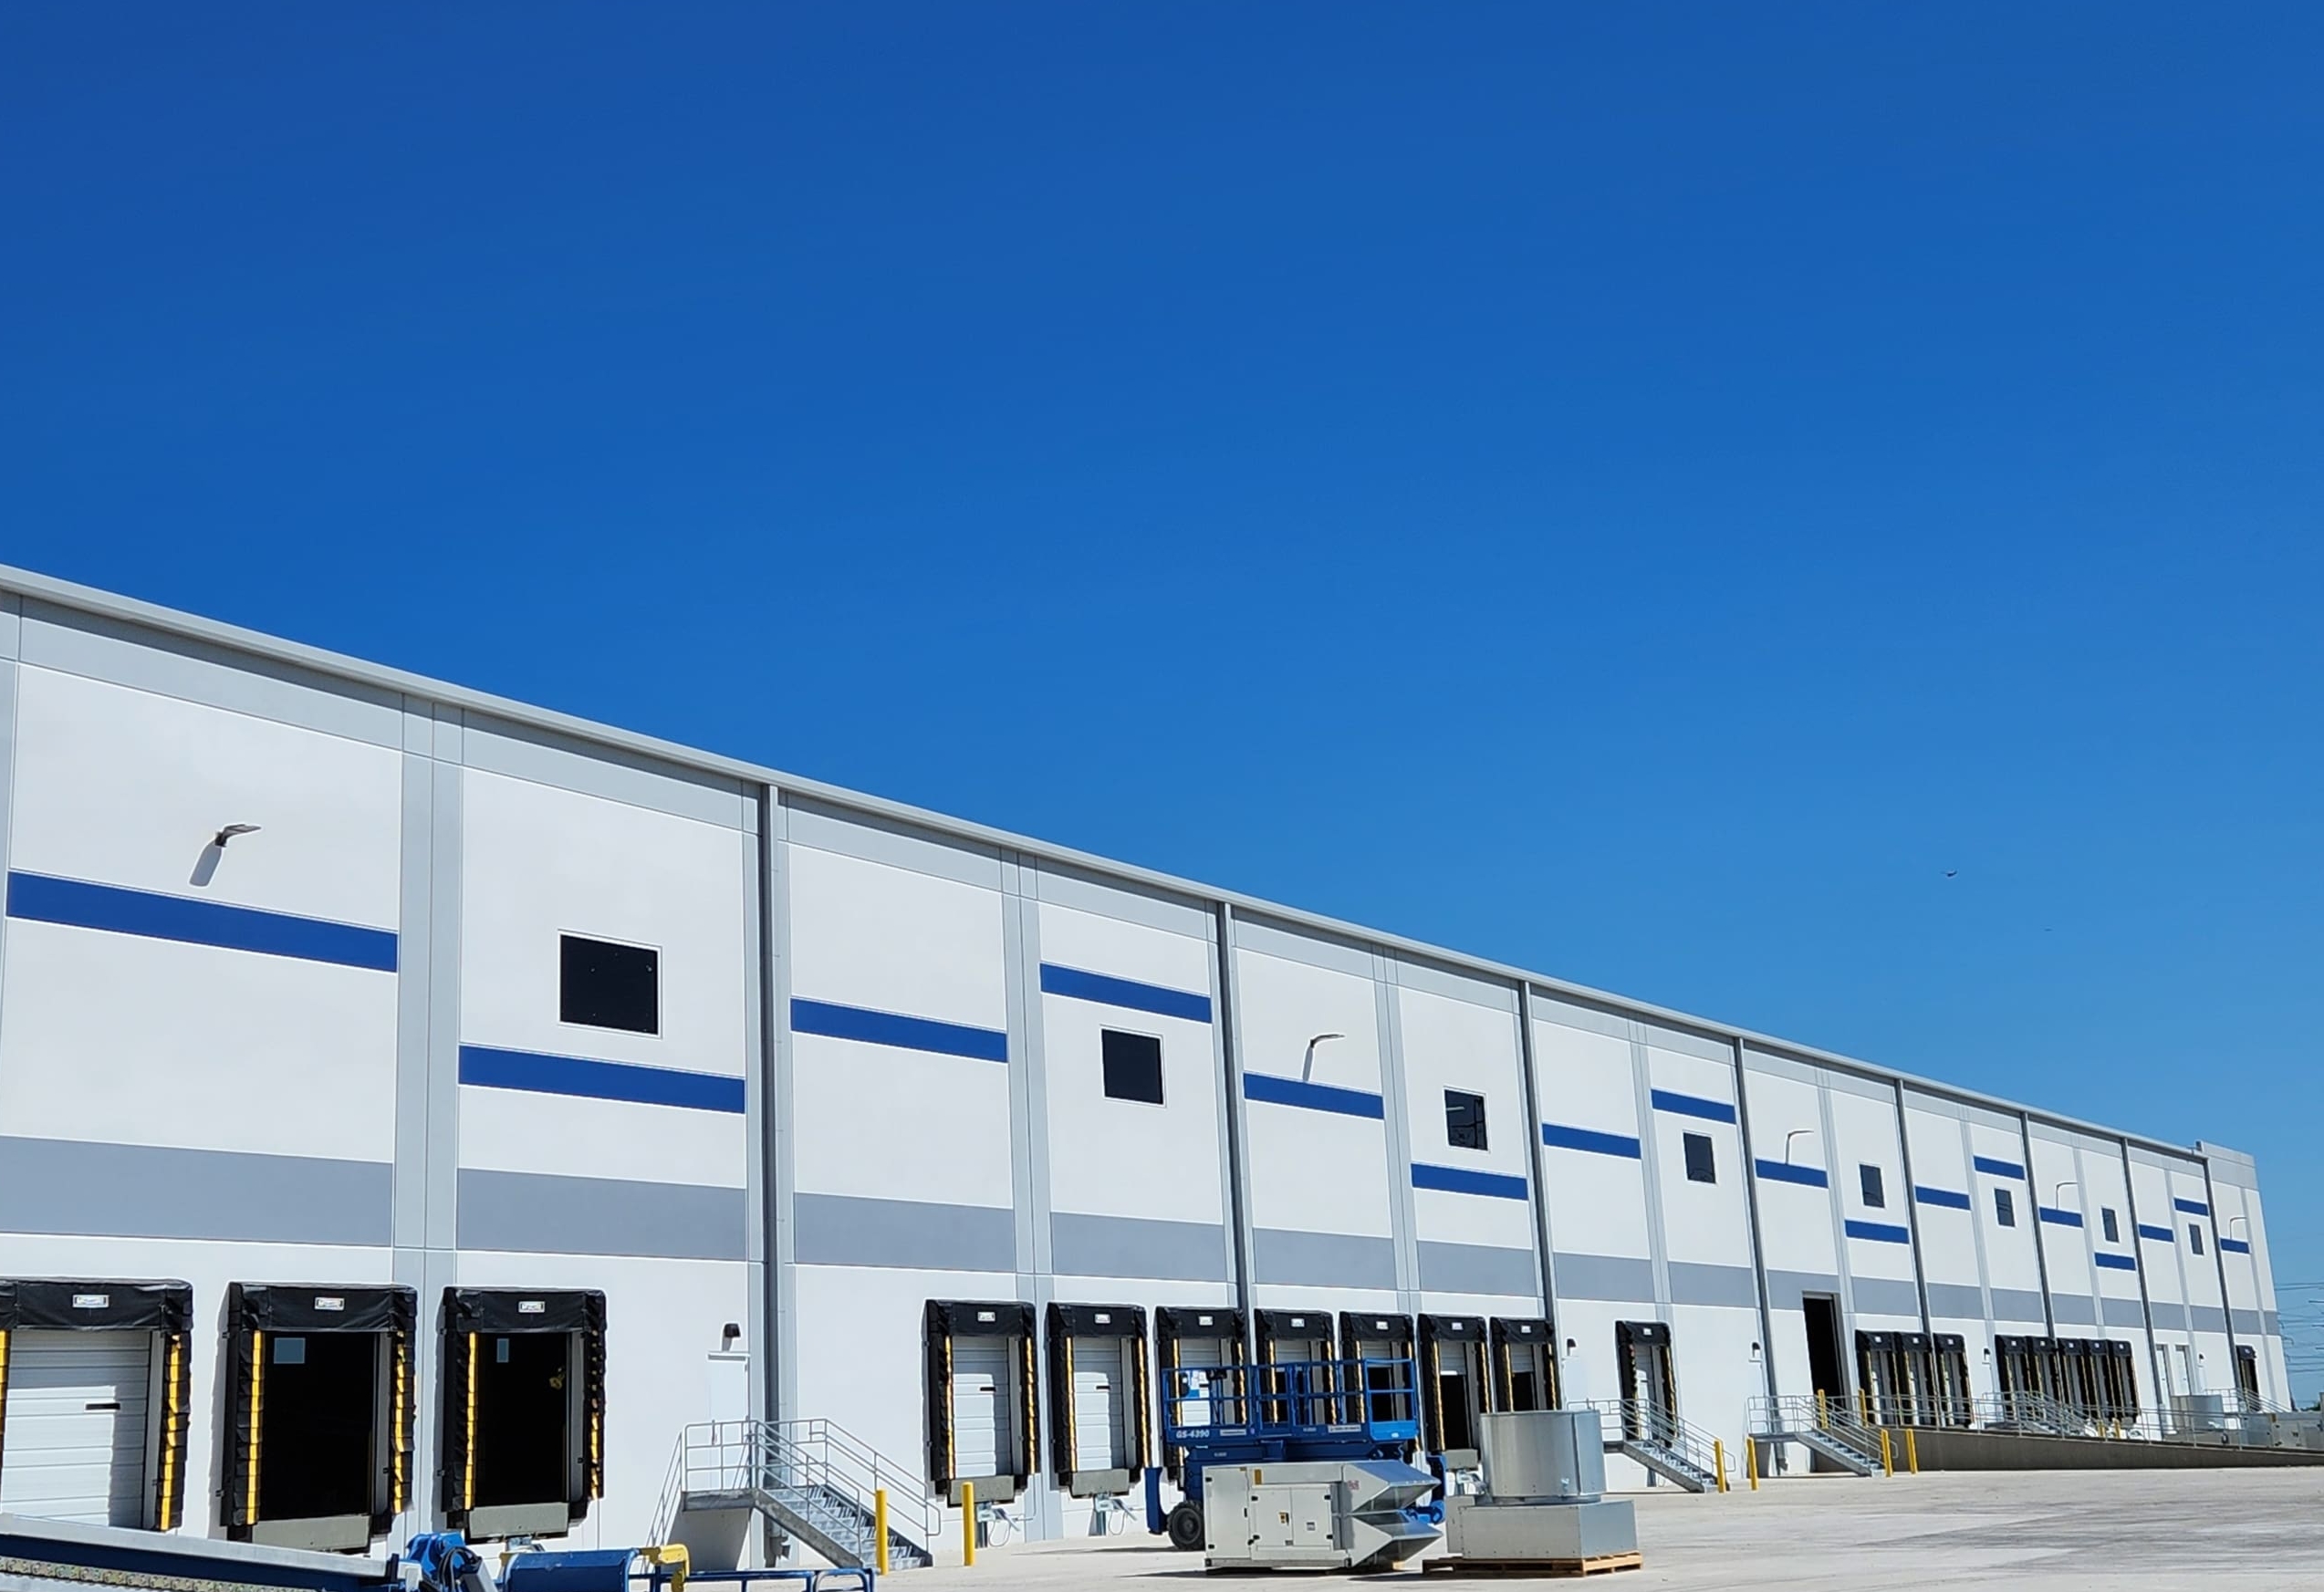 A modern industrial warehouse with a white facade and blue accents. Multiple loading docks along the side of the building are visible under a clear blue sky.